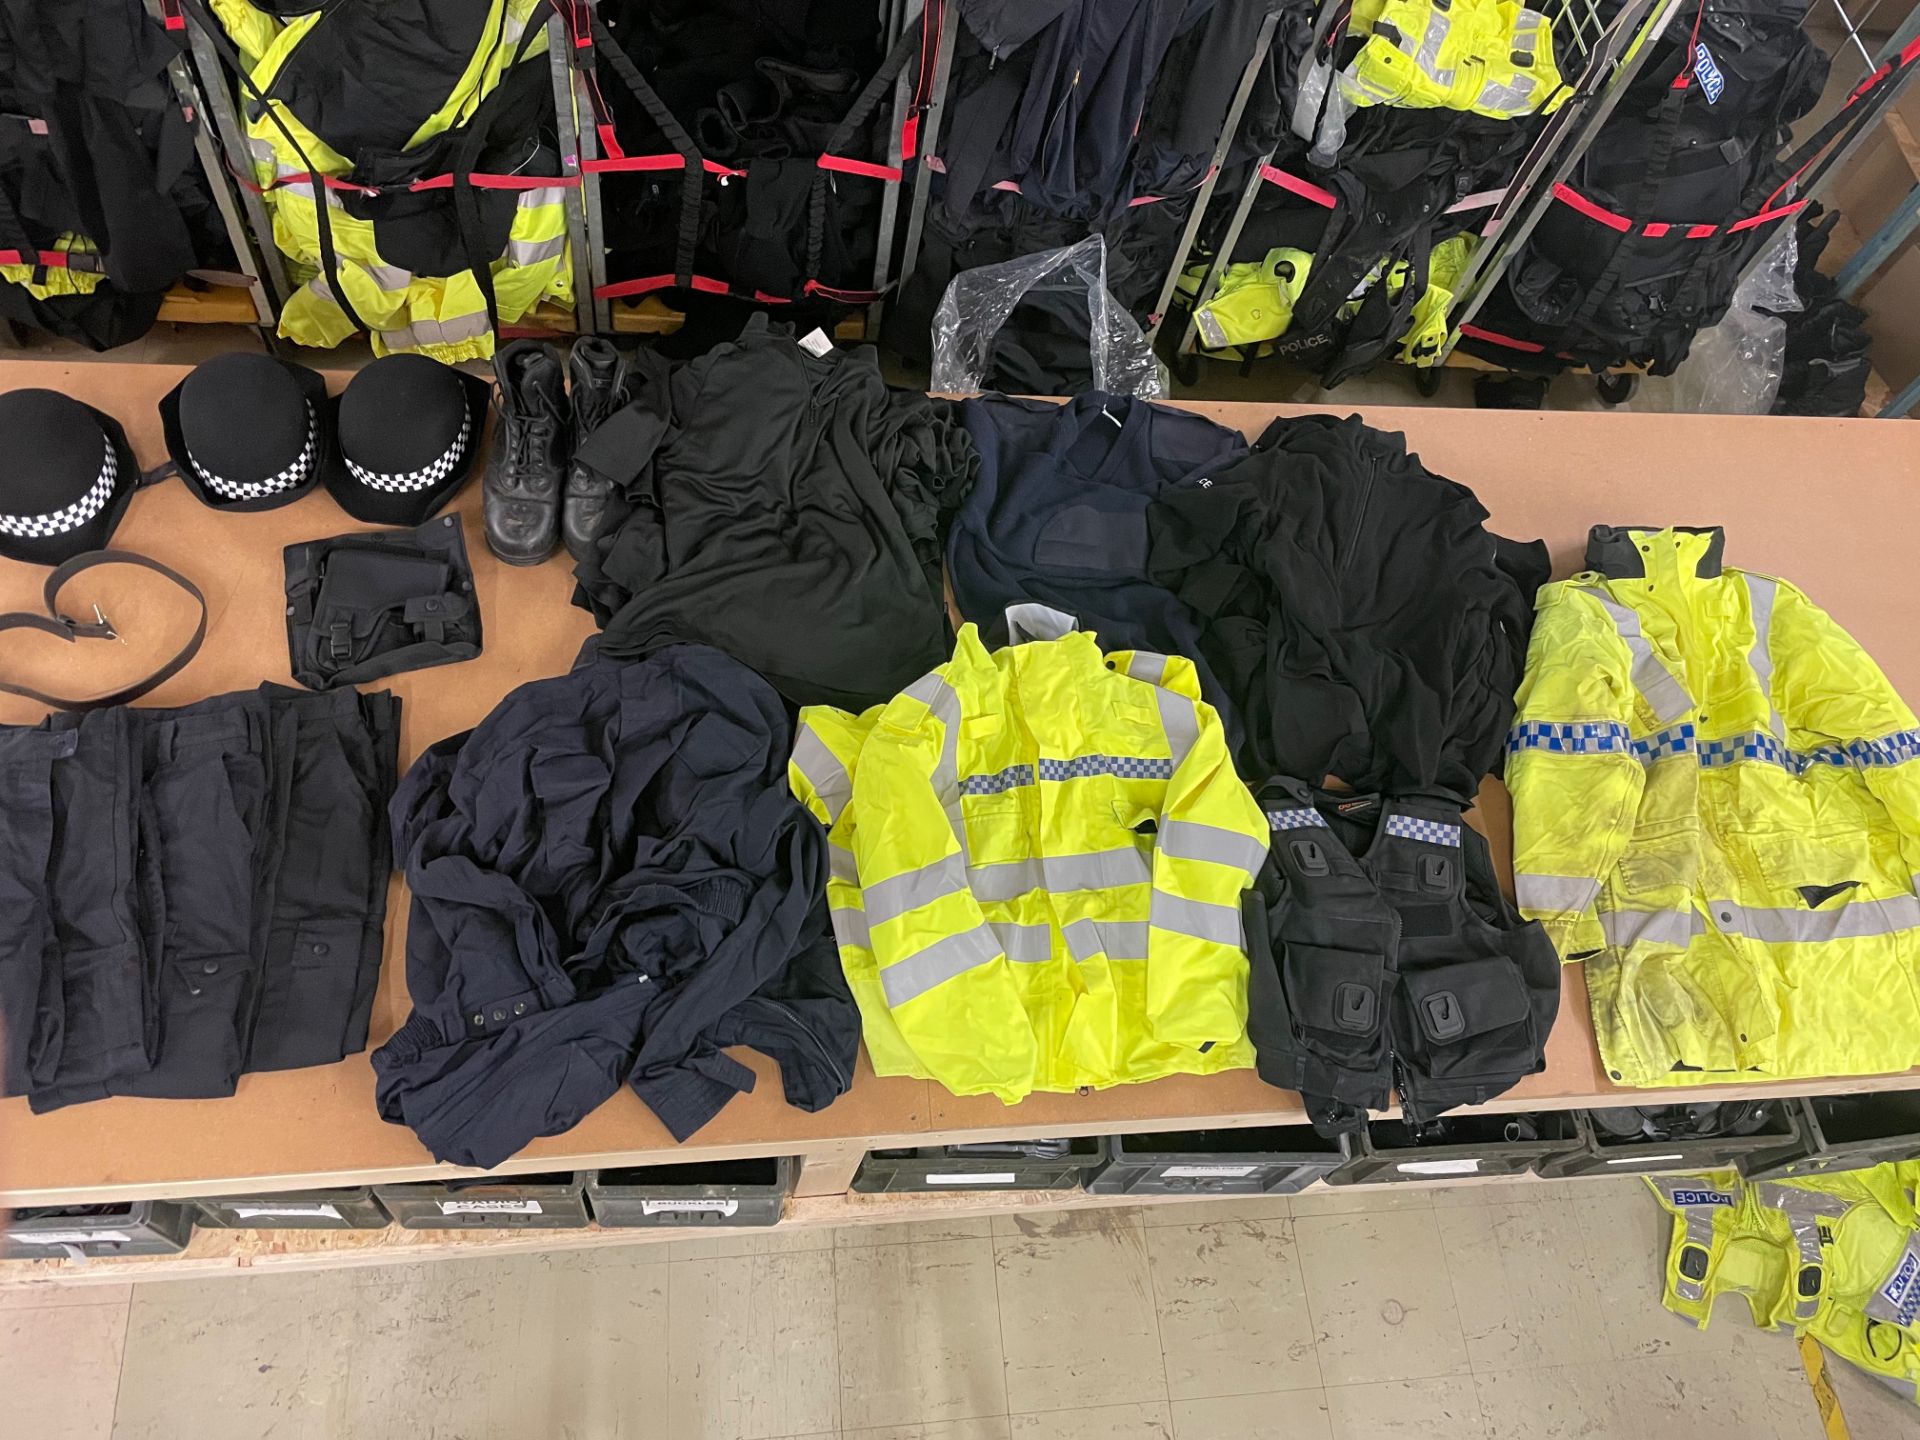 20 X BAGS FULL TO THE BRIM WITH POLICE CLOTHING & ACCESSORIES - RRP £5500.00 - NO VAT ON HAMMER - Bild 5 aus 12